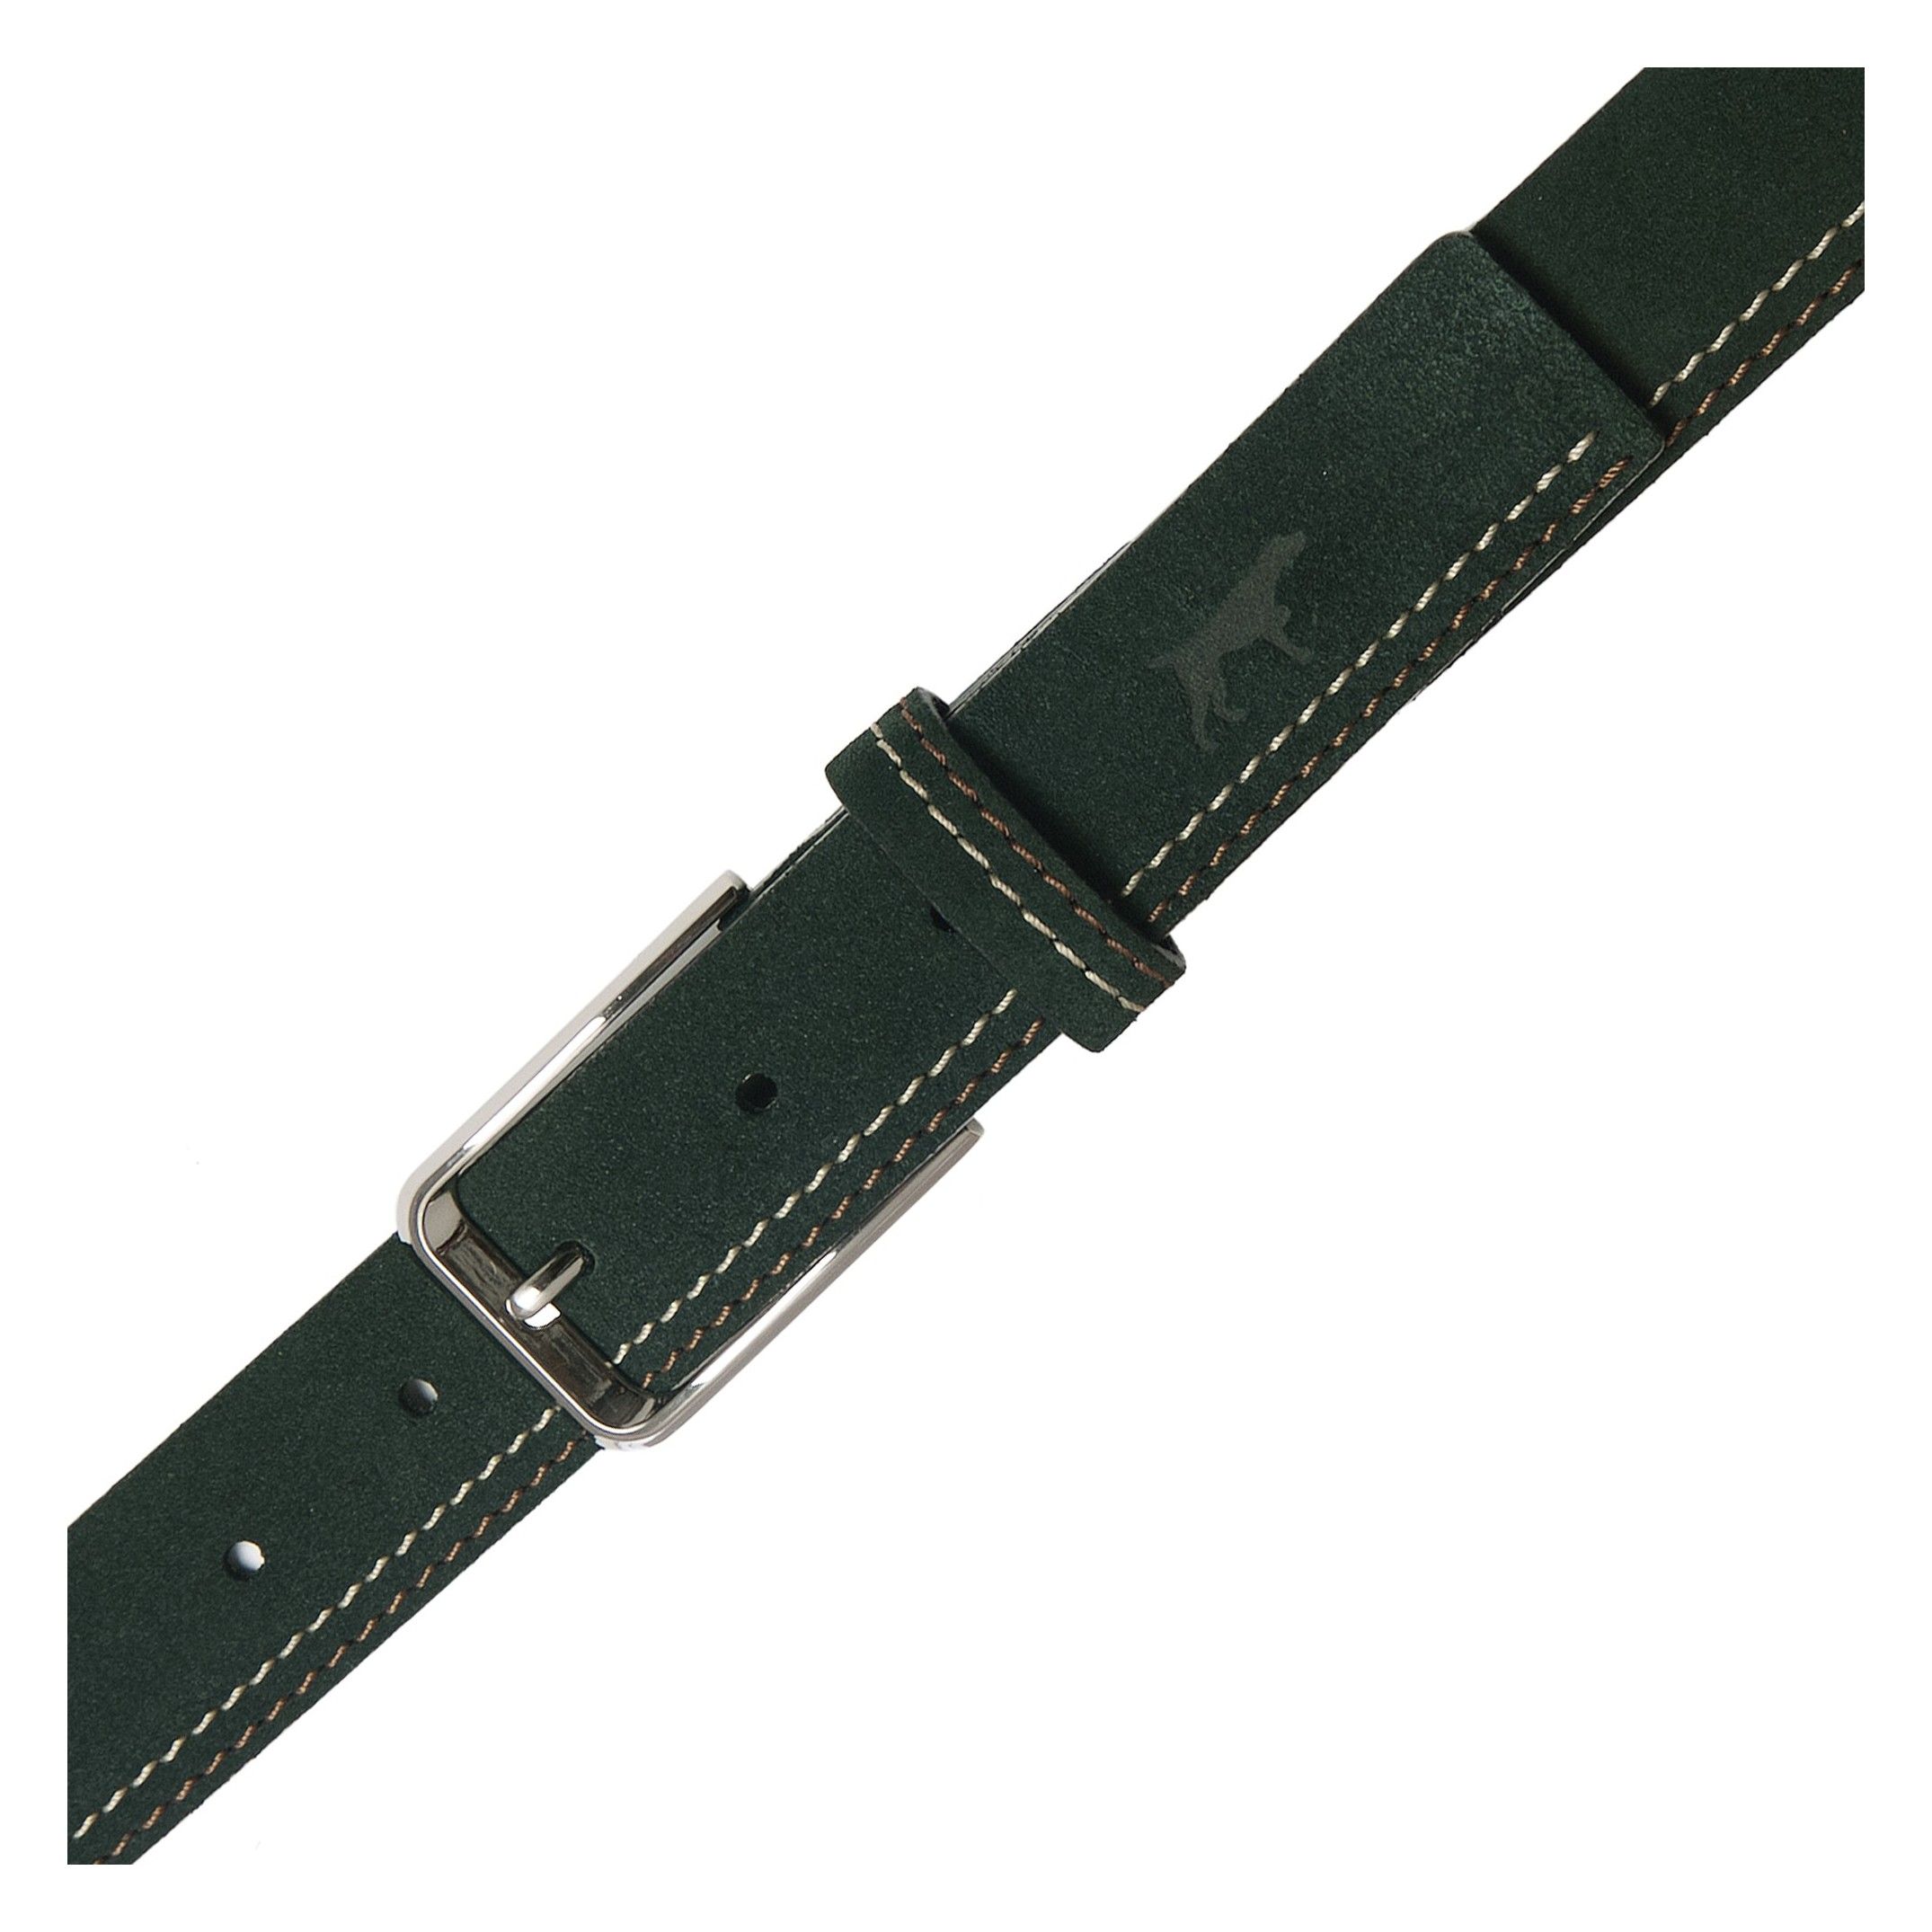 Castellanisimos men's leather belt with double stitching on the lower part in two shades. Metal buckle. Width: 3.5 cm. MADE IN SPAIN.